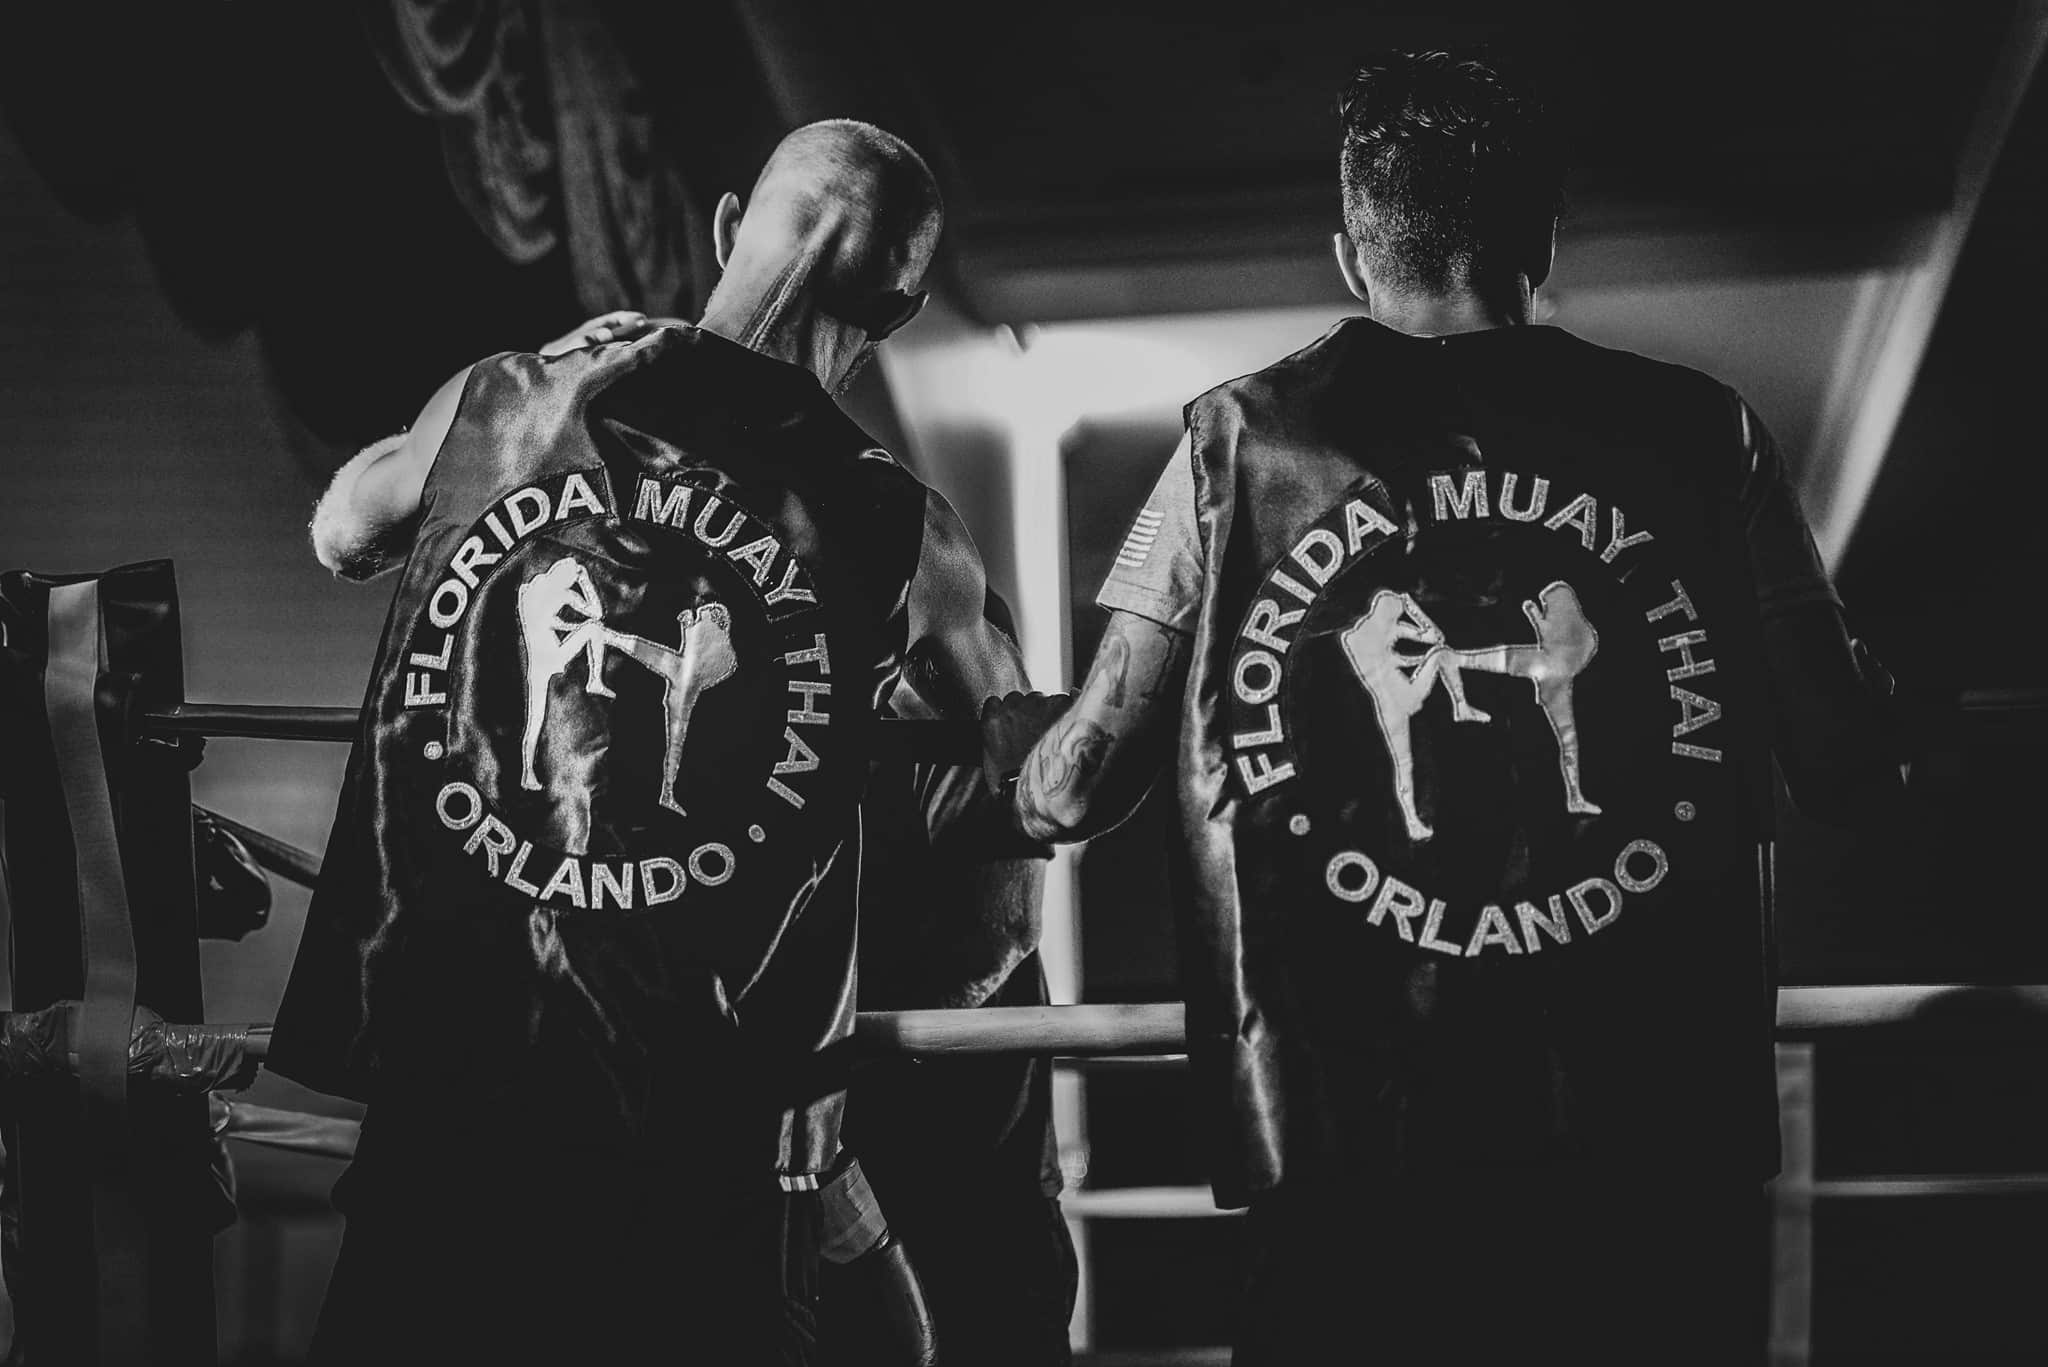 Florida Muay Thai Who We Are